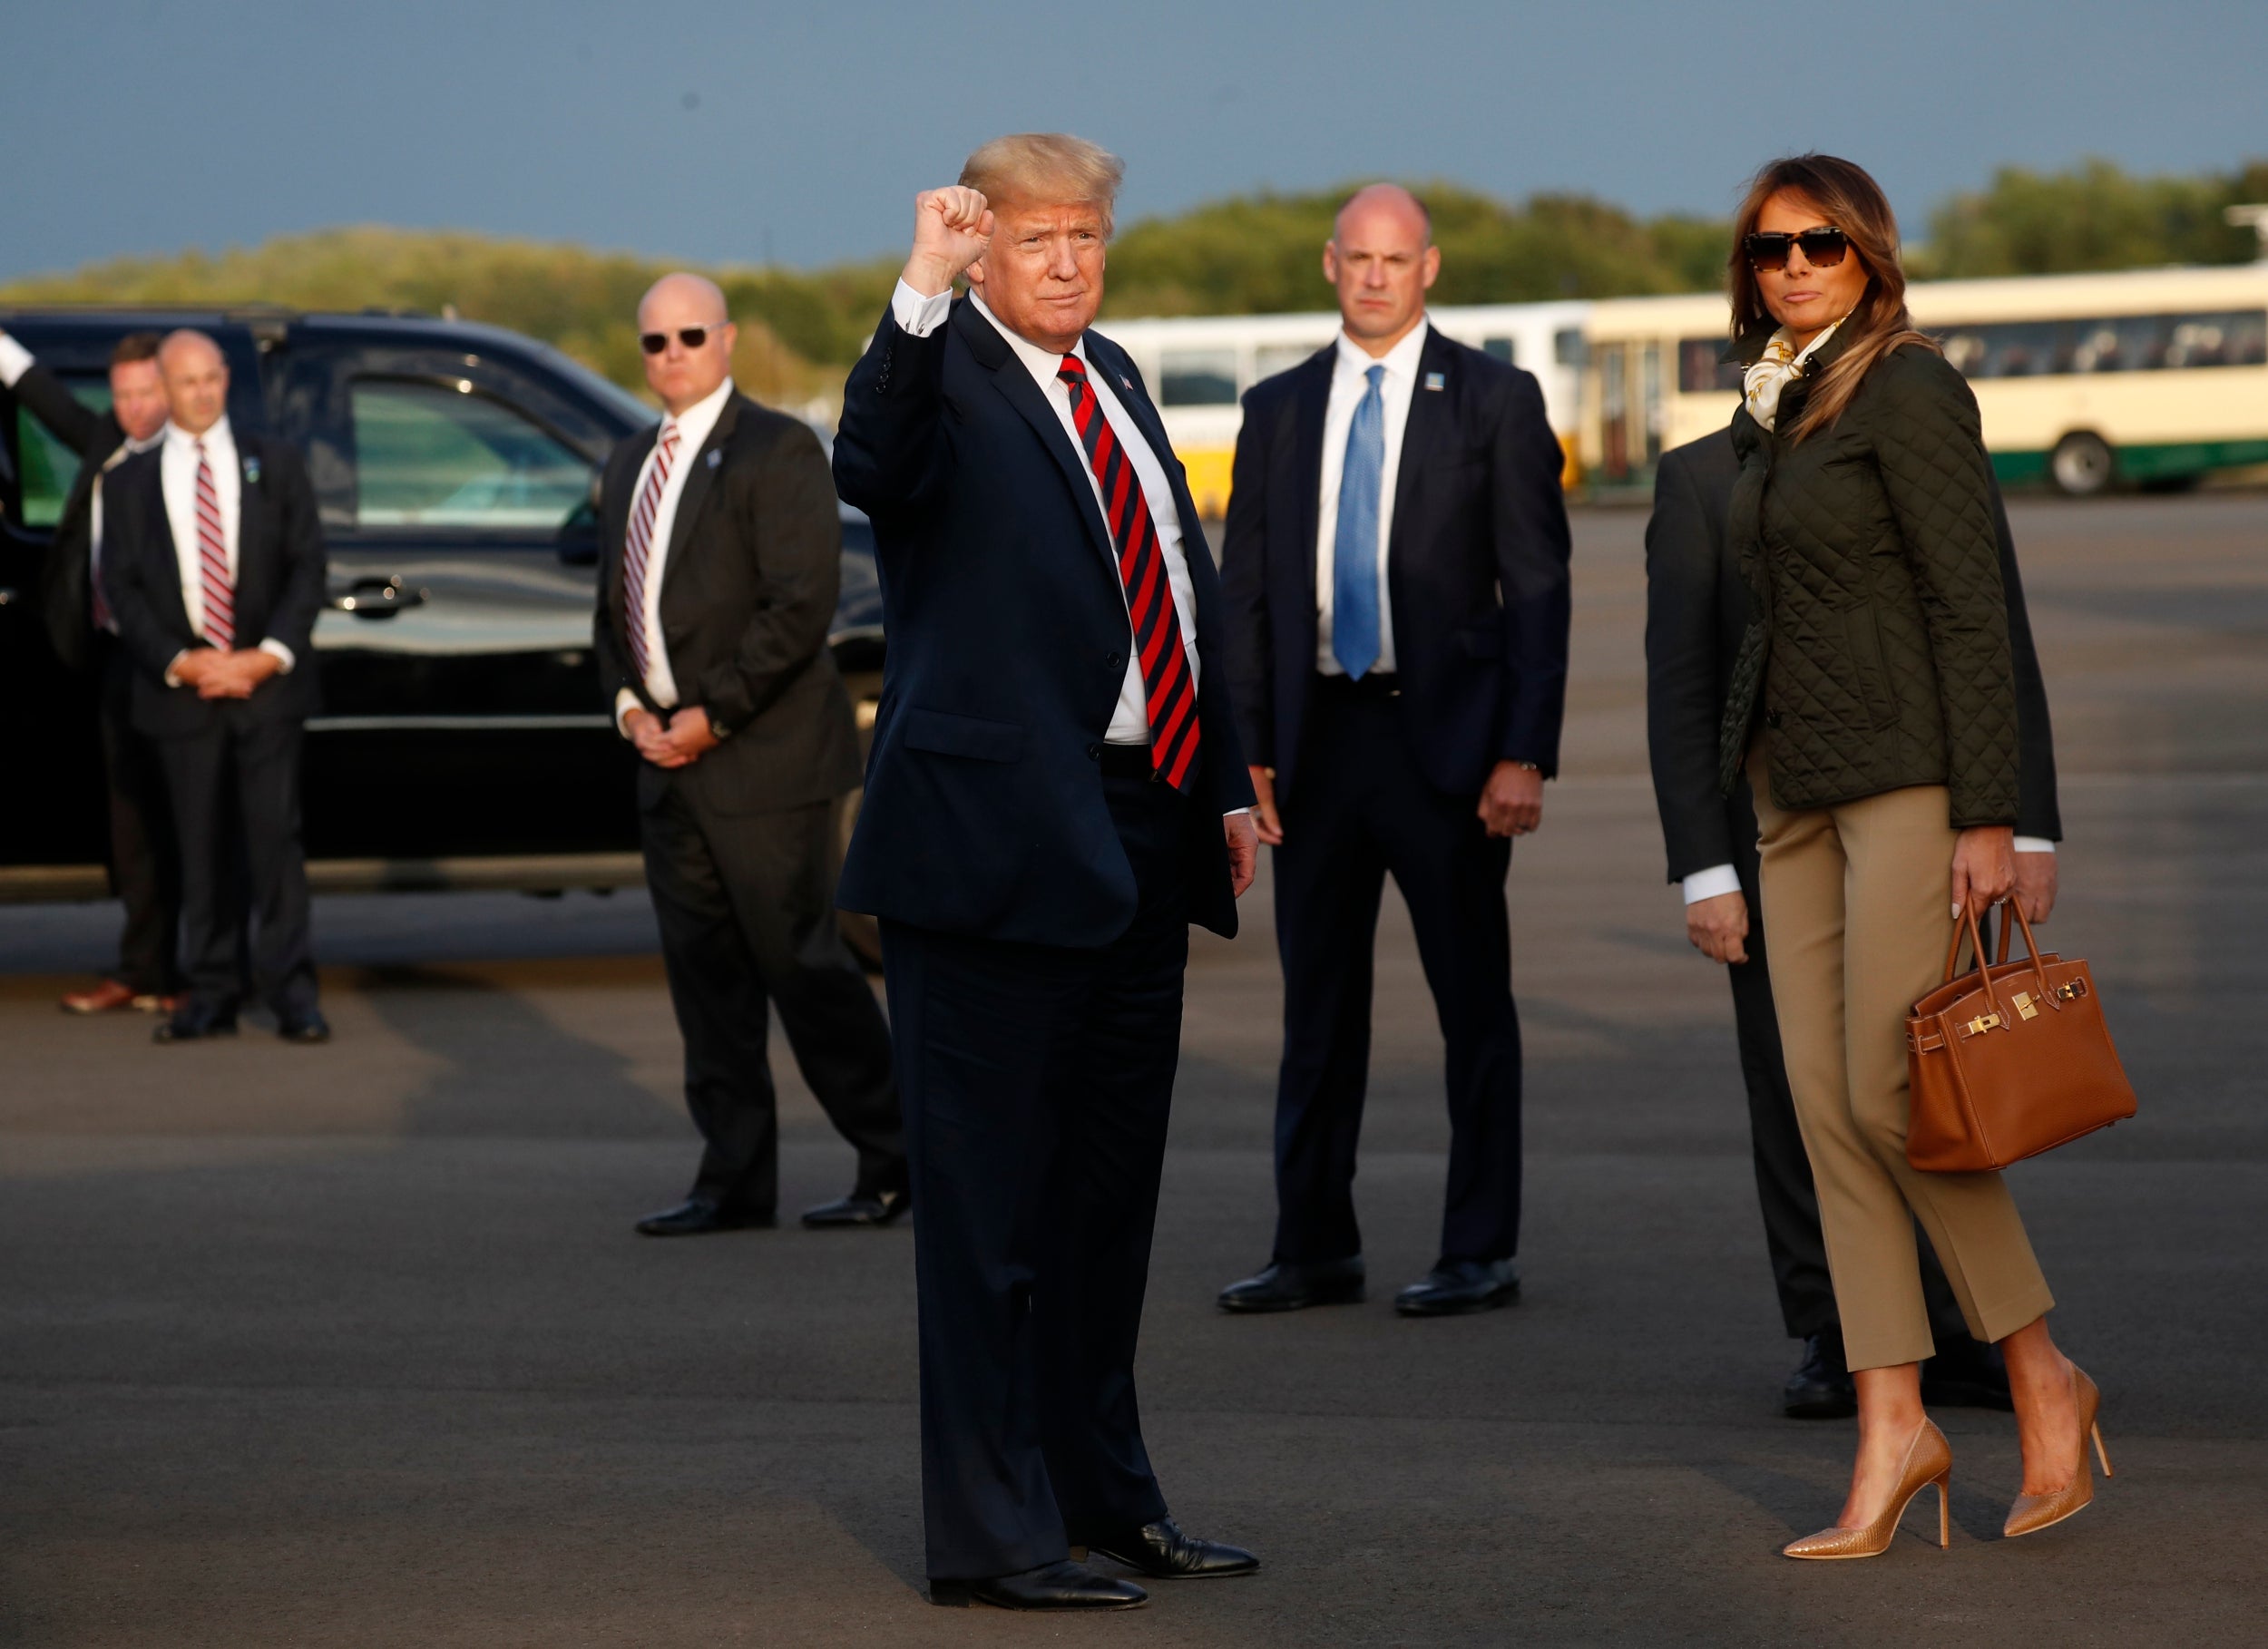 It was reported that the Donald 'flew into a rage' after catching Melania watching CNN rather than Fox News